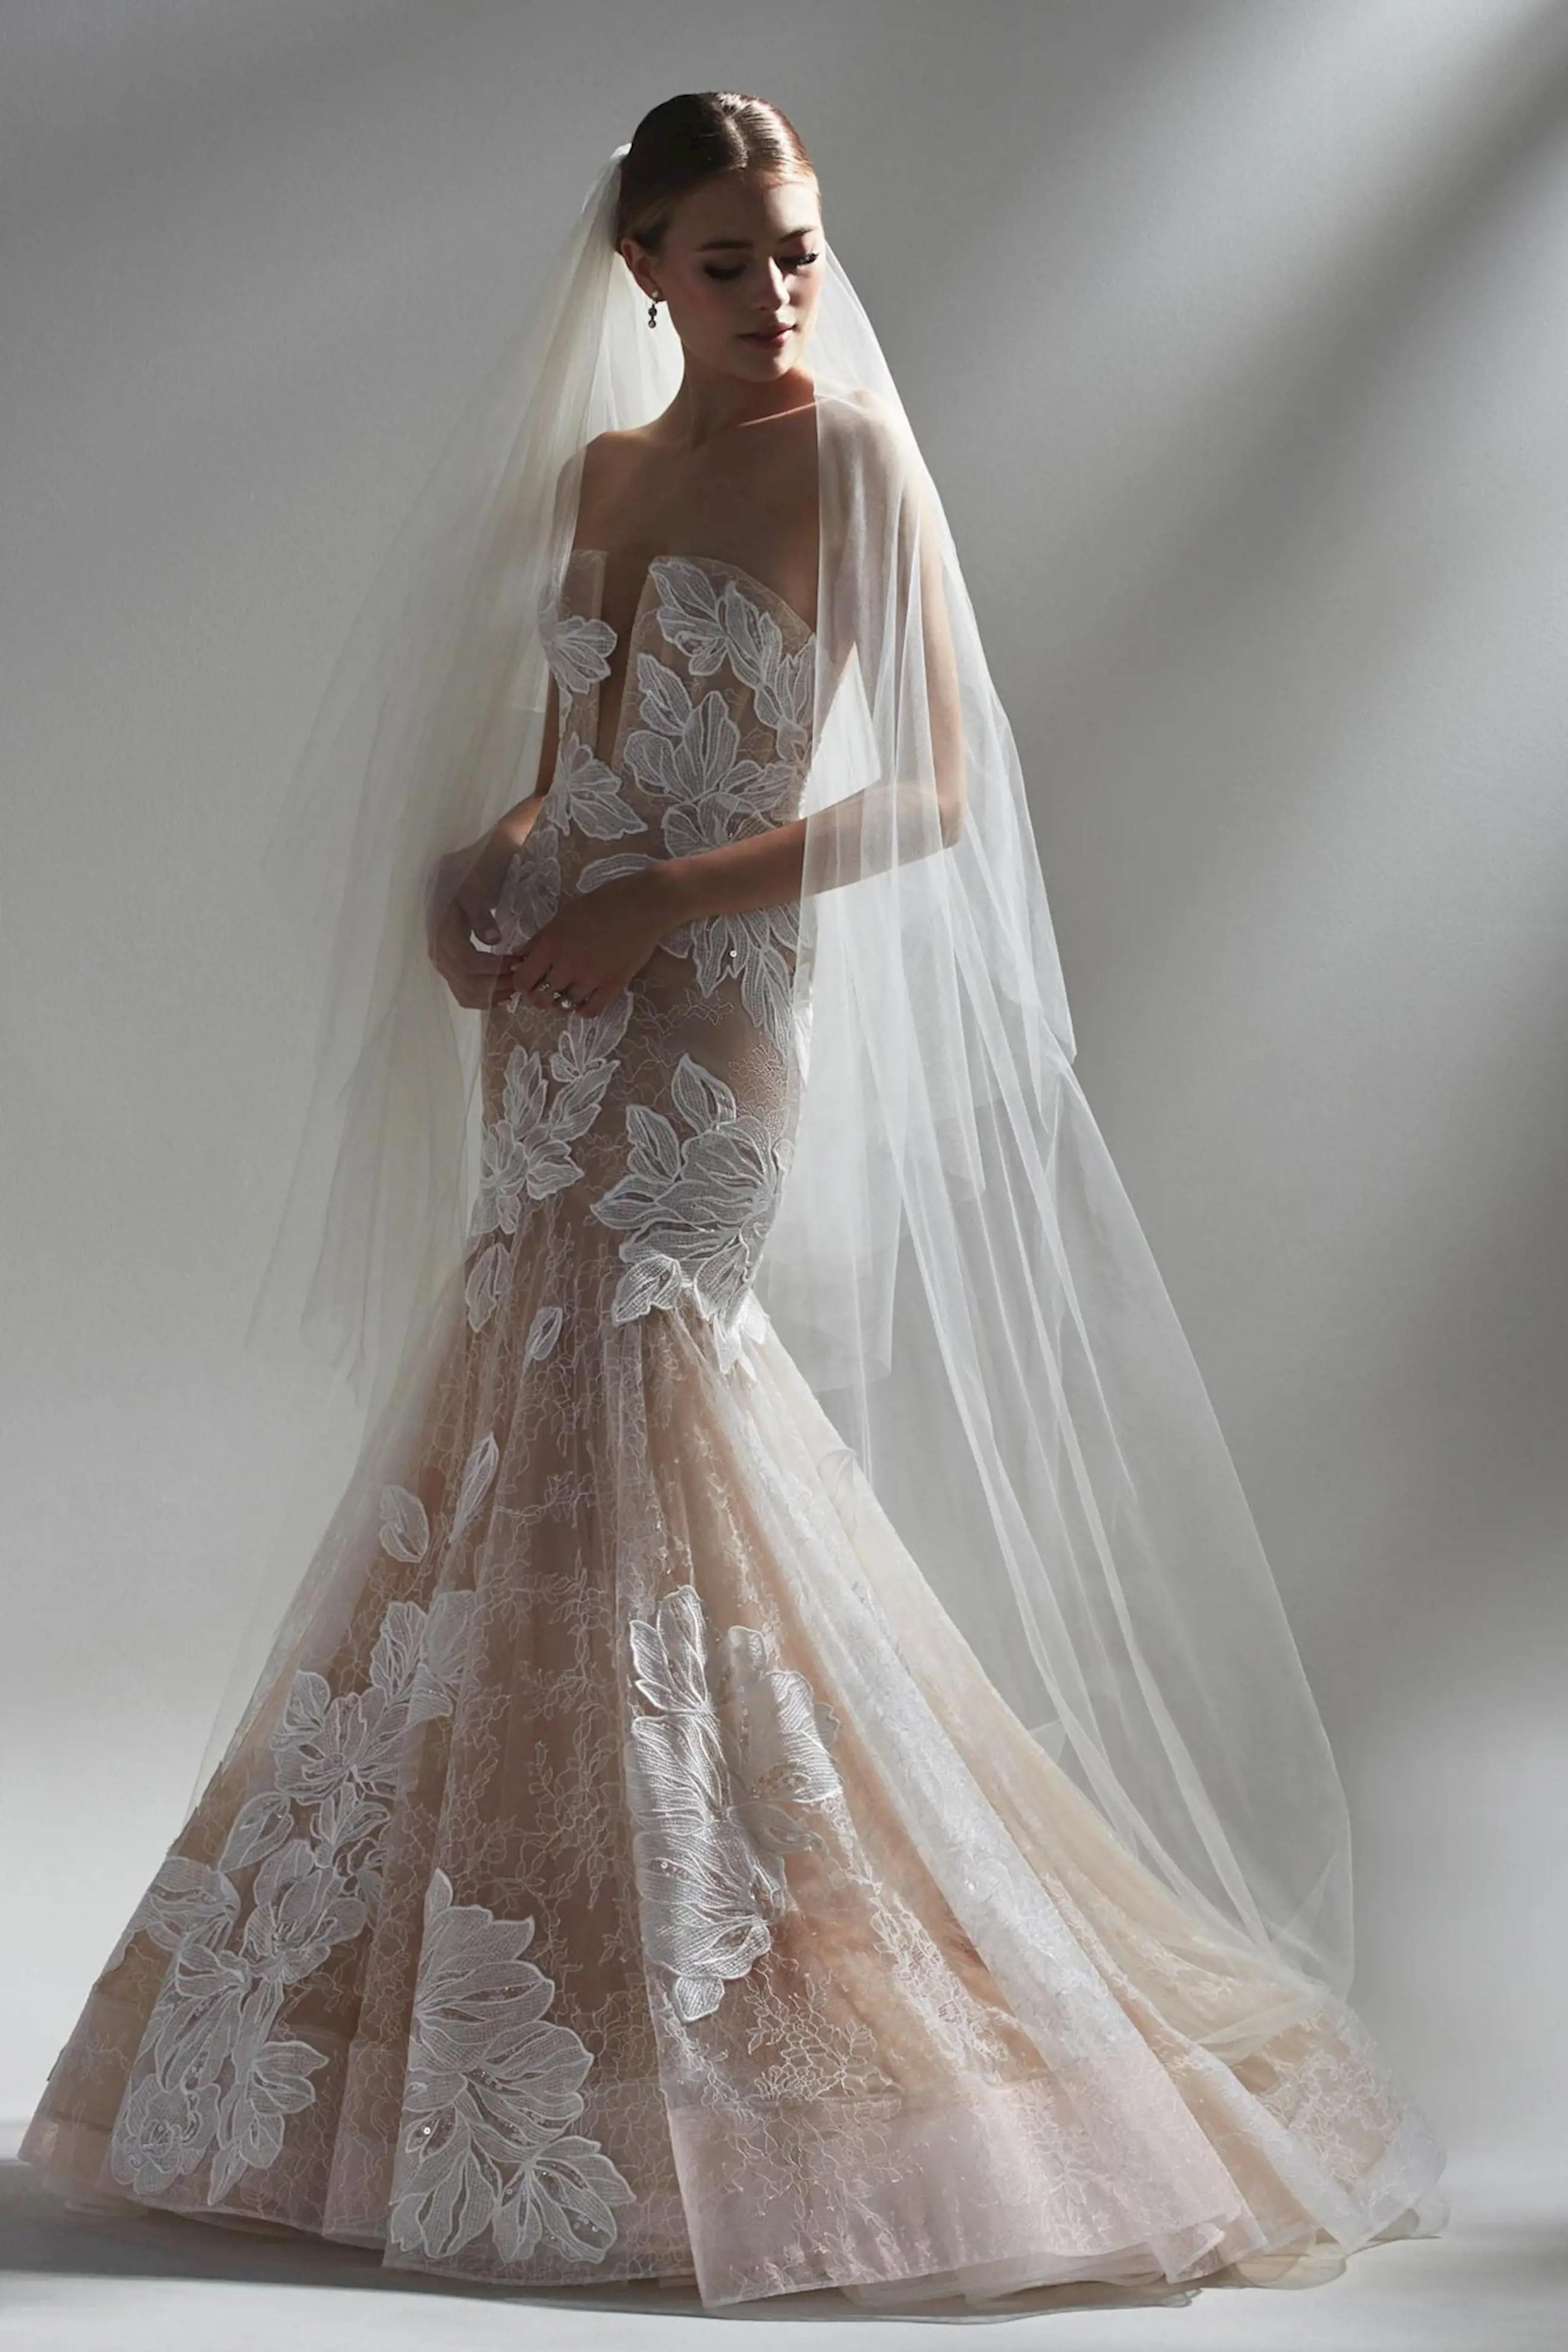 Autumn-Inspired Bridal Gowns Image